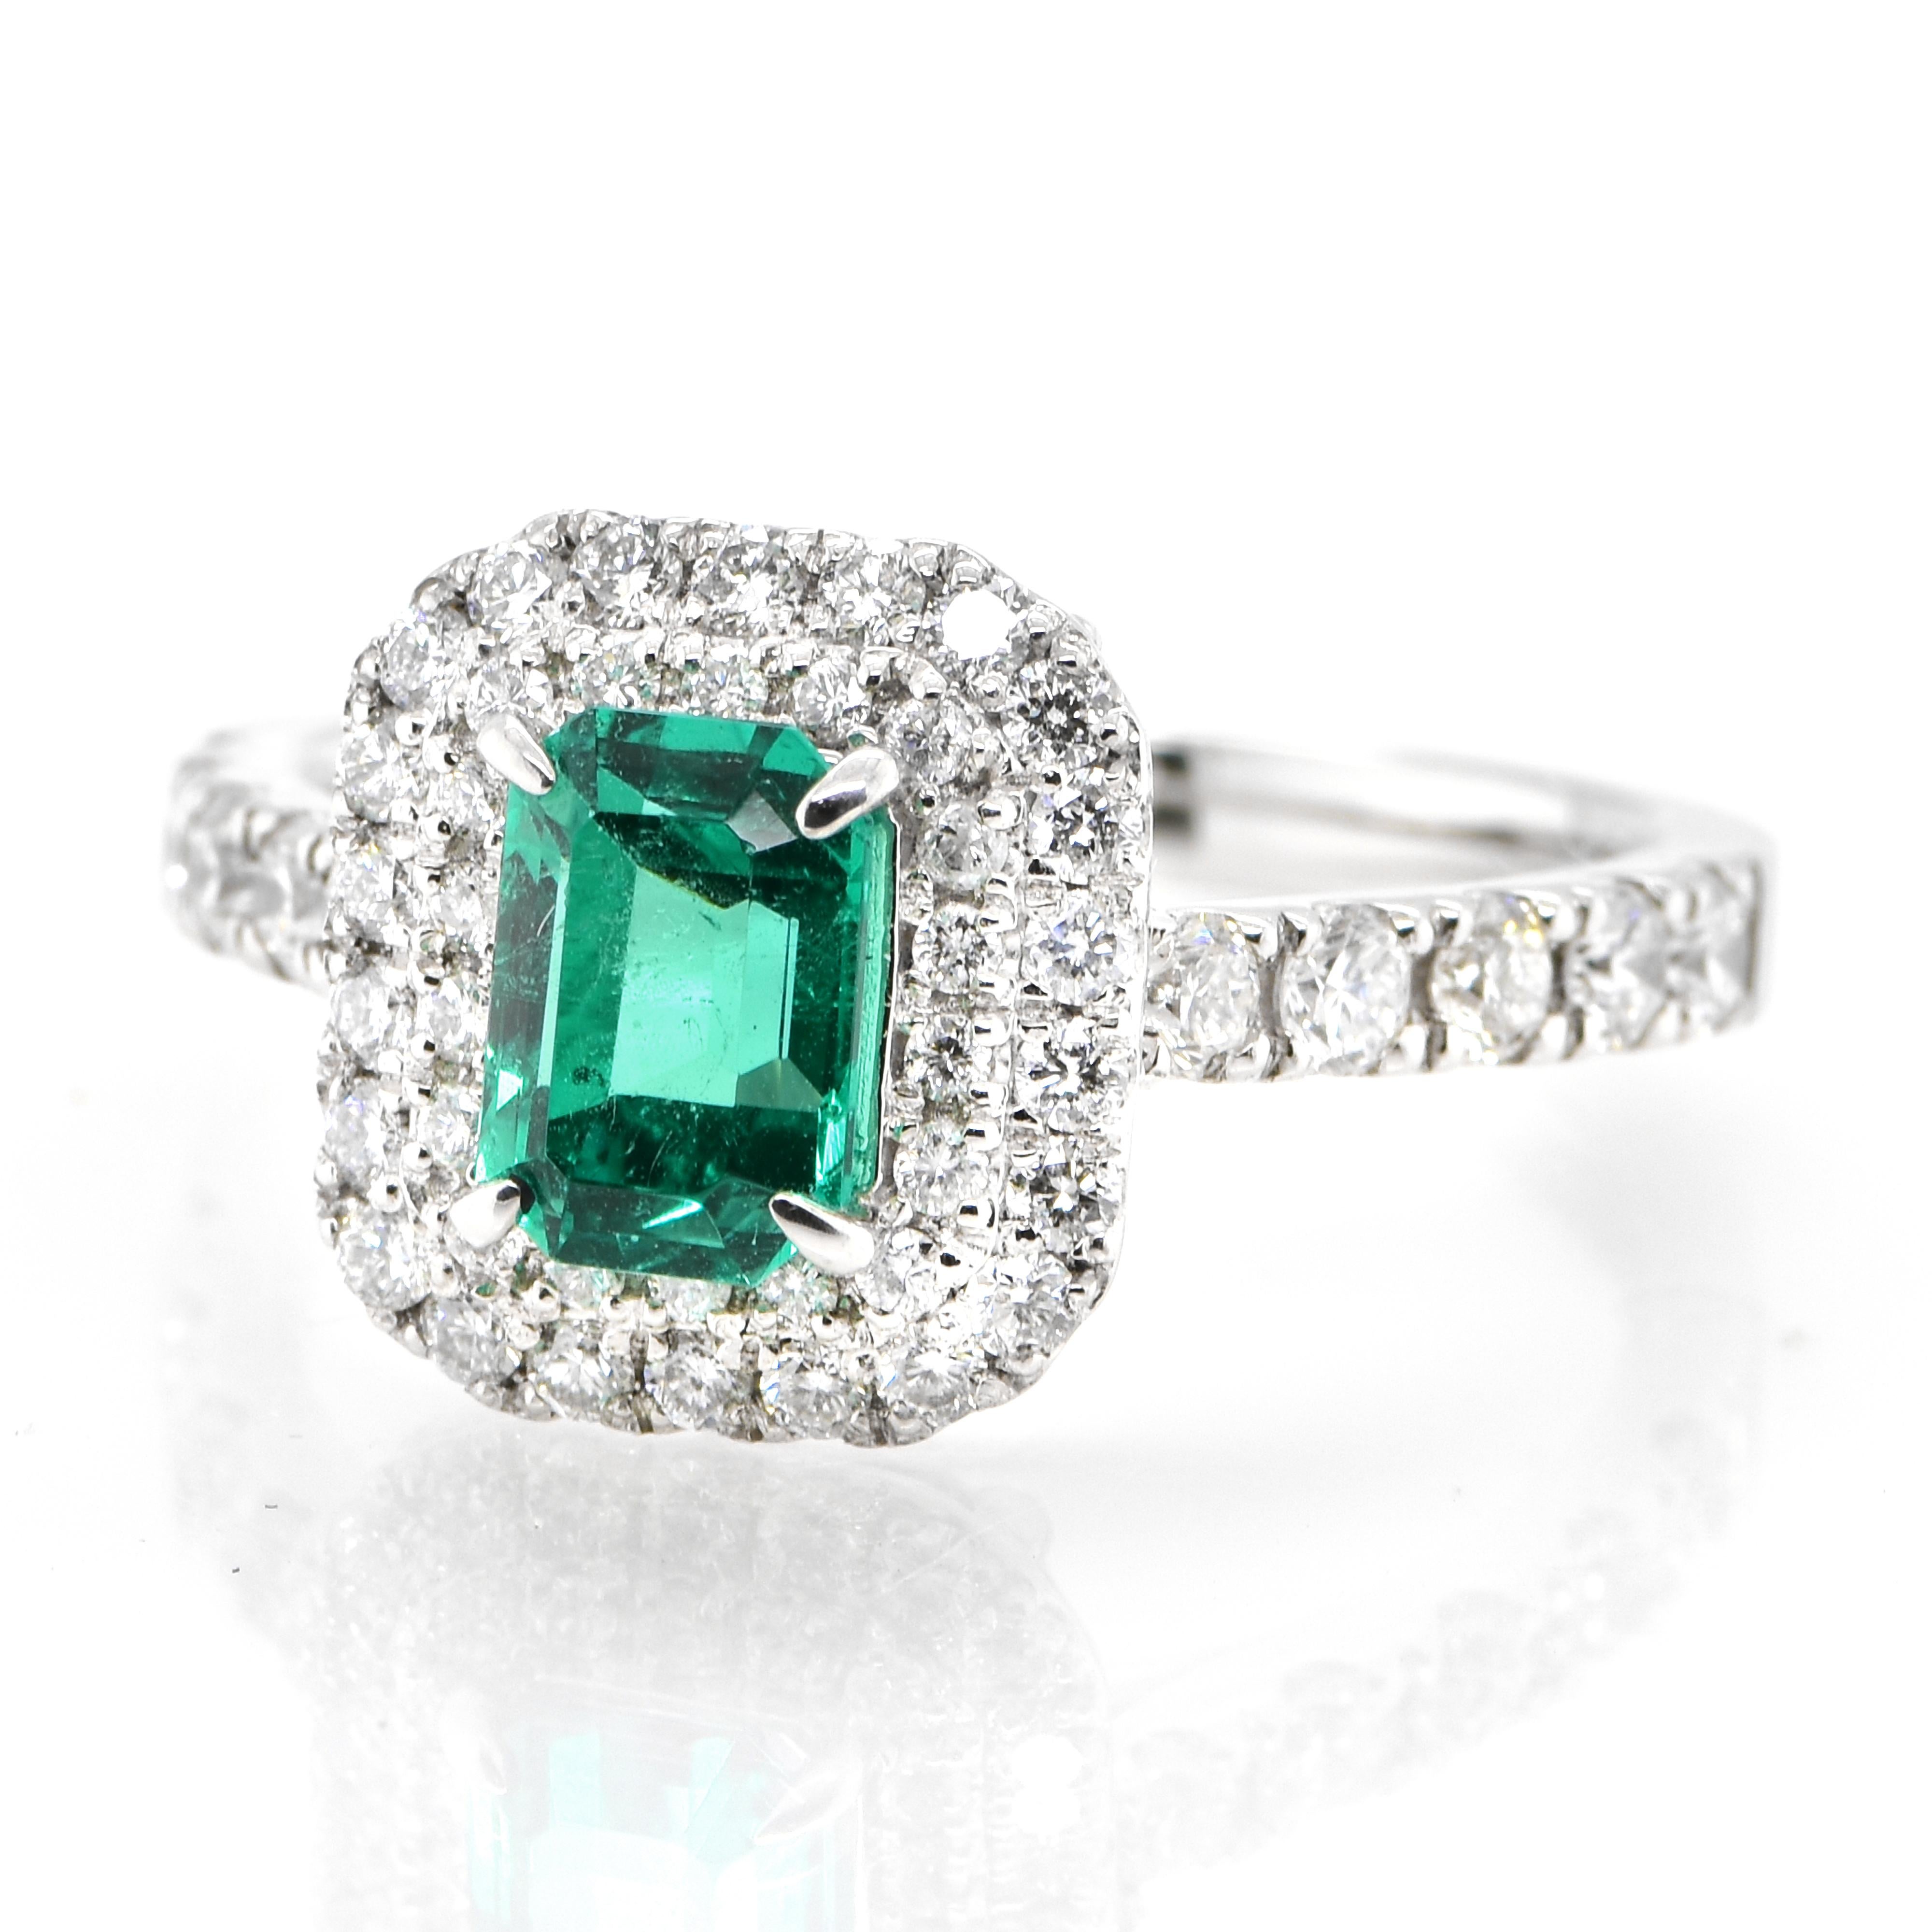 A stunning ring featuring a GIA Certified 0.98 Carat Natural, Untreated (No Oil), Colombian Emerald and 0.77 Carats of Diamond Accents set in Platinum. People have admired emerald’s green for thousands of years. Emeralds have always been associated